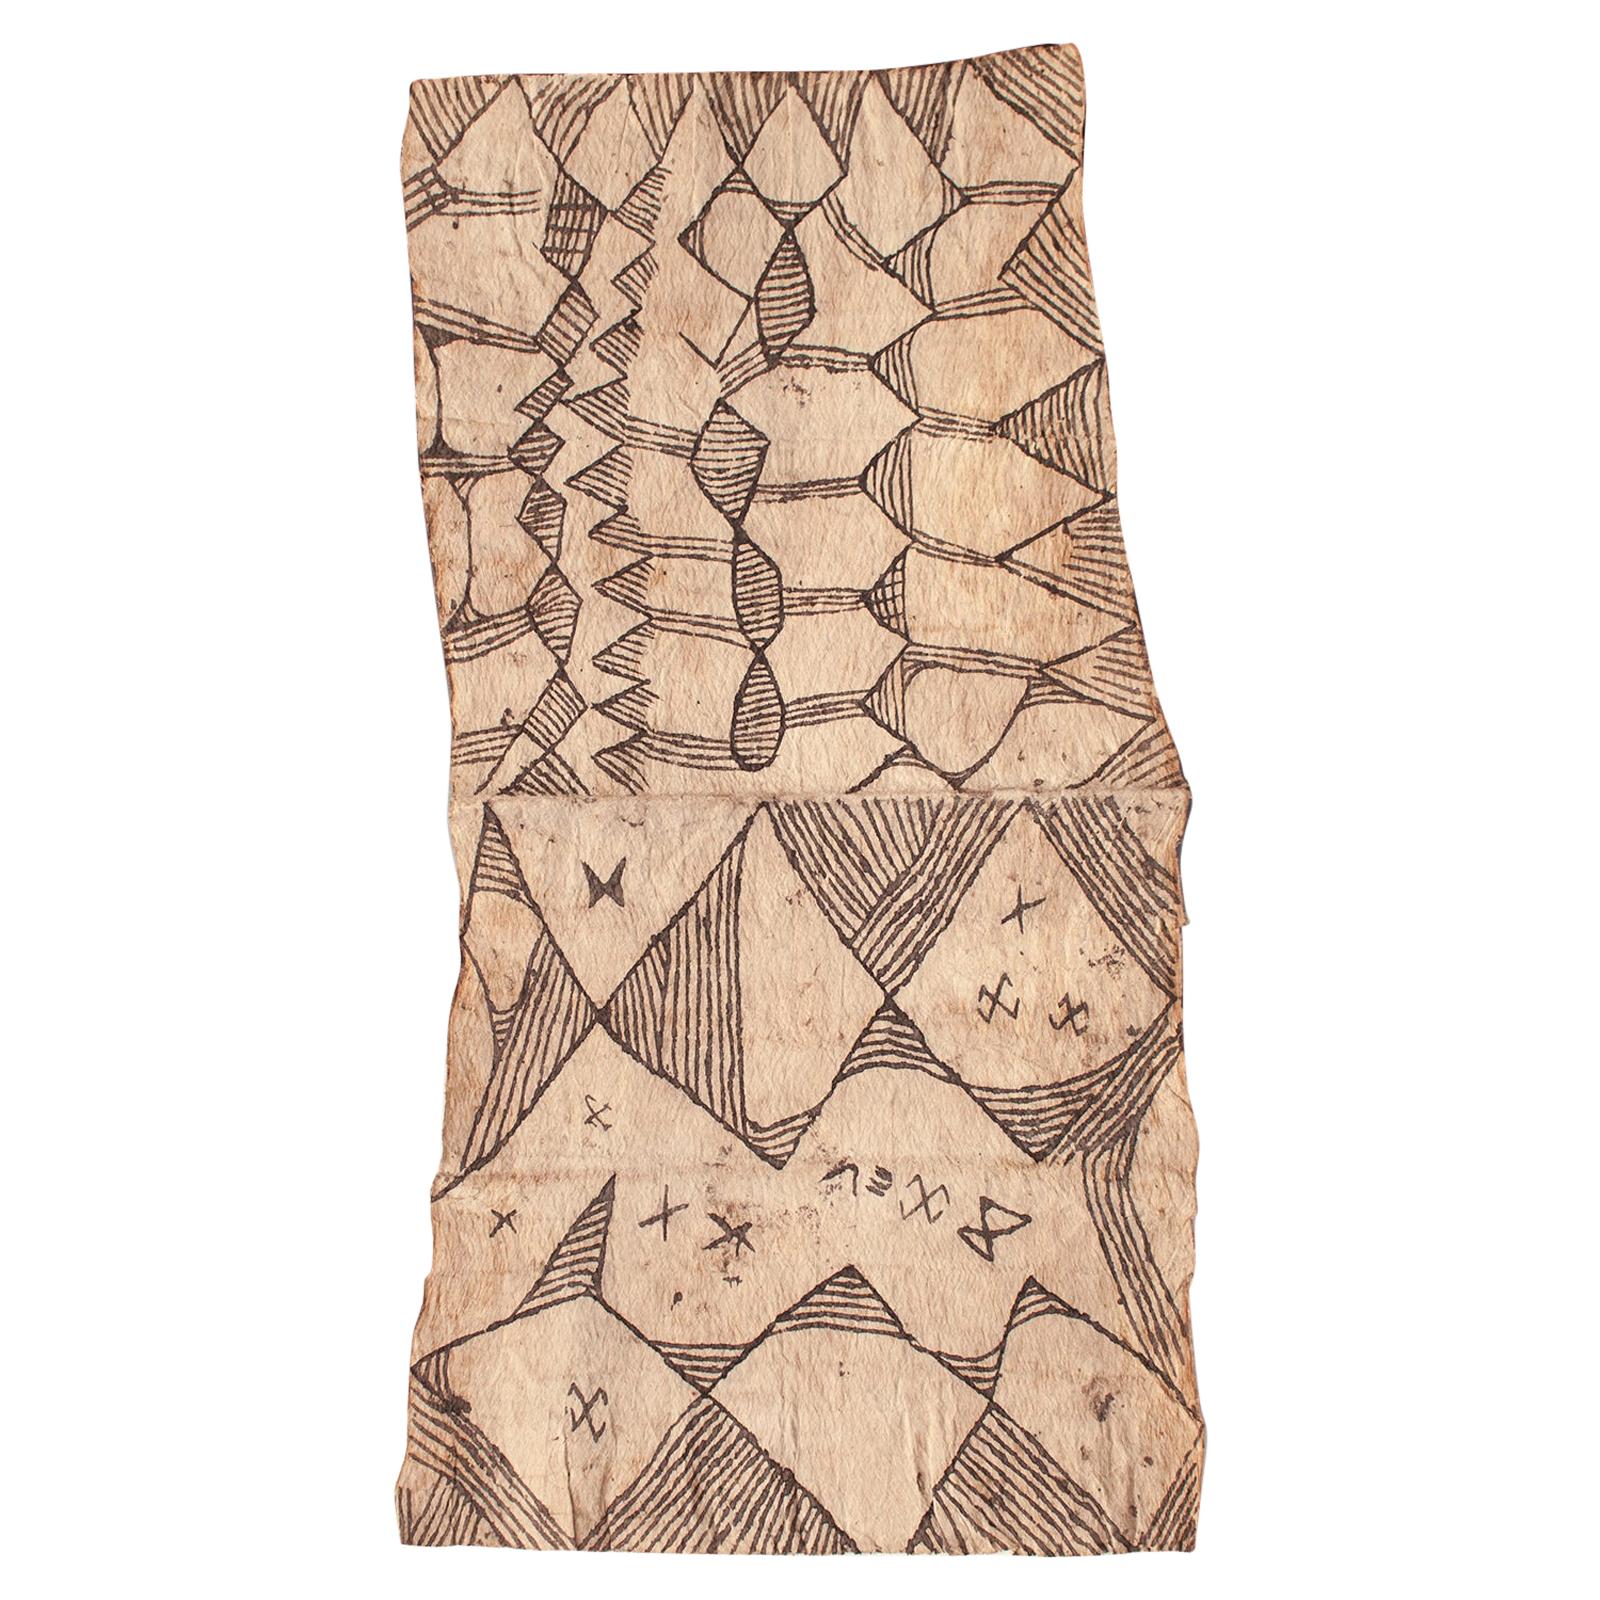 20th Century Bark Cloth Painting, Mbuti 'Efe' People, D.R. Congo For Sale